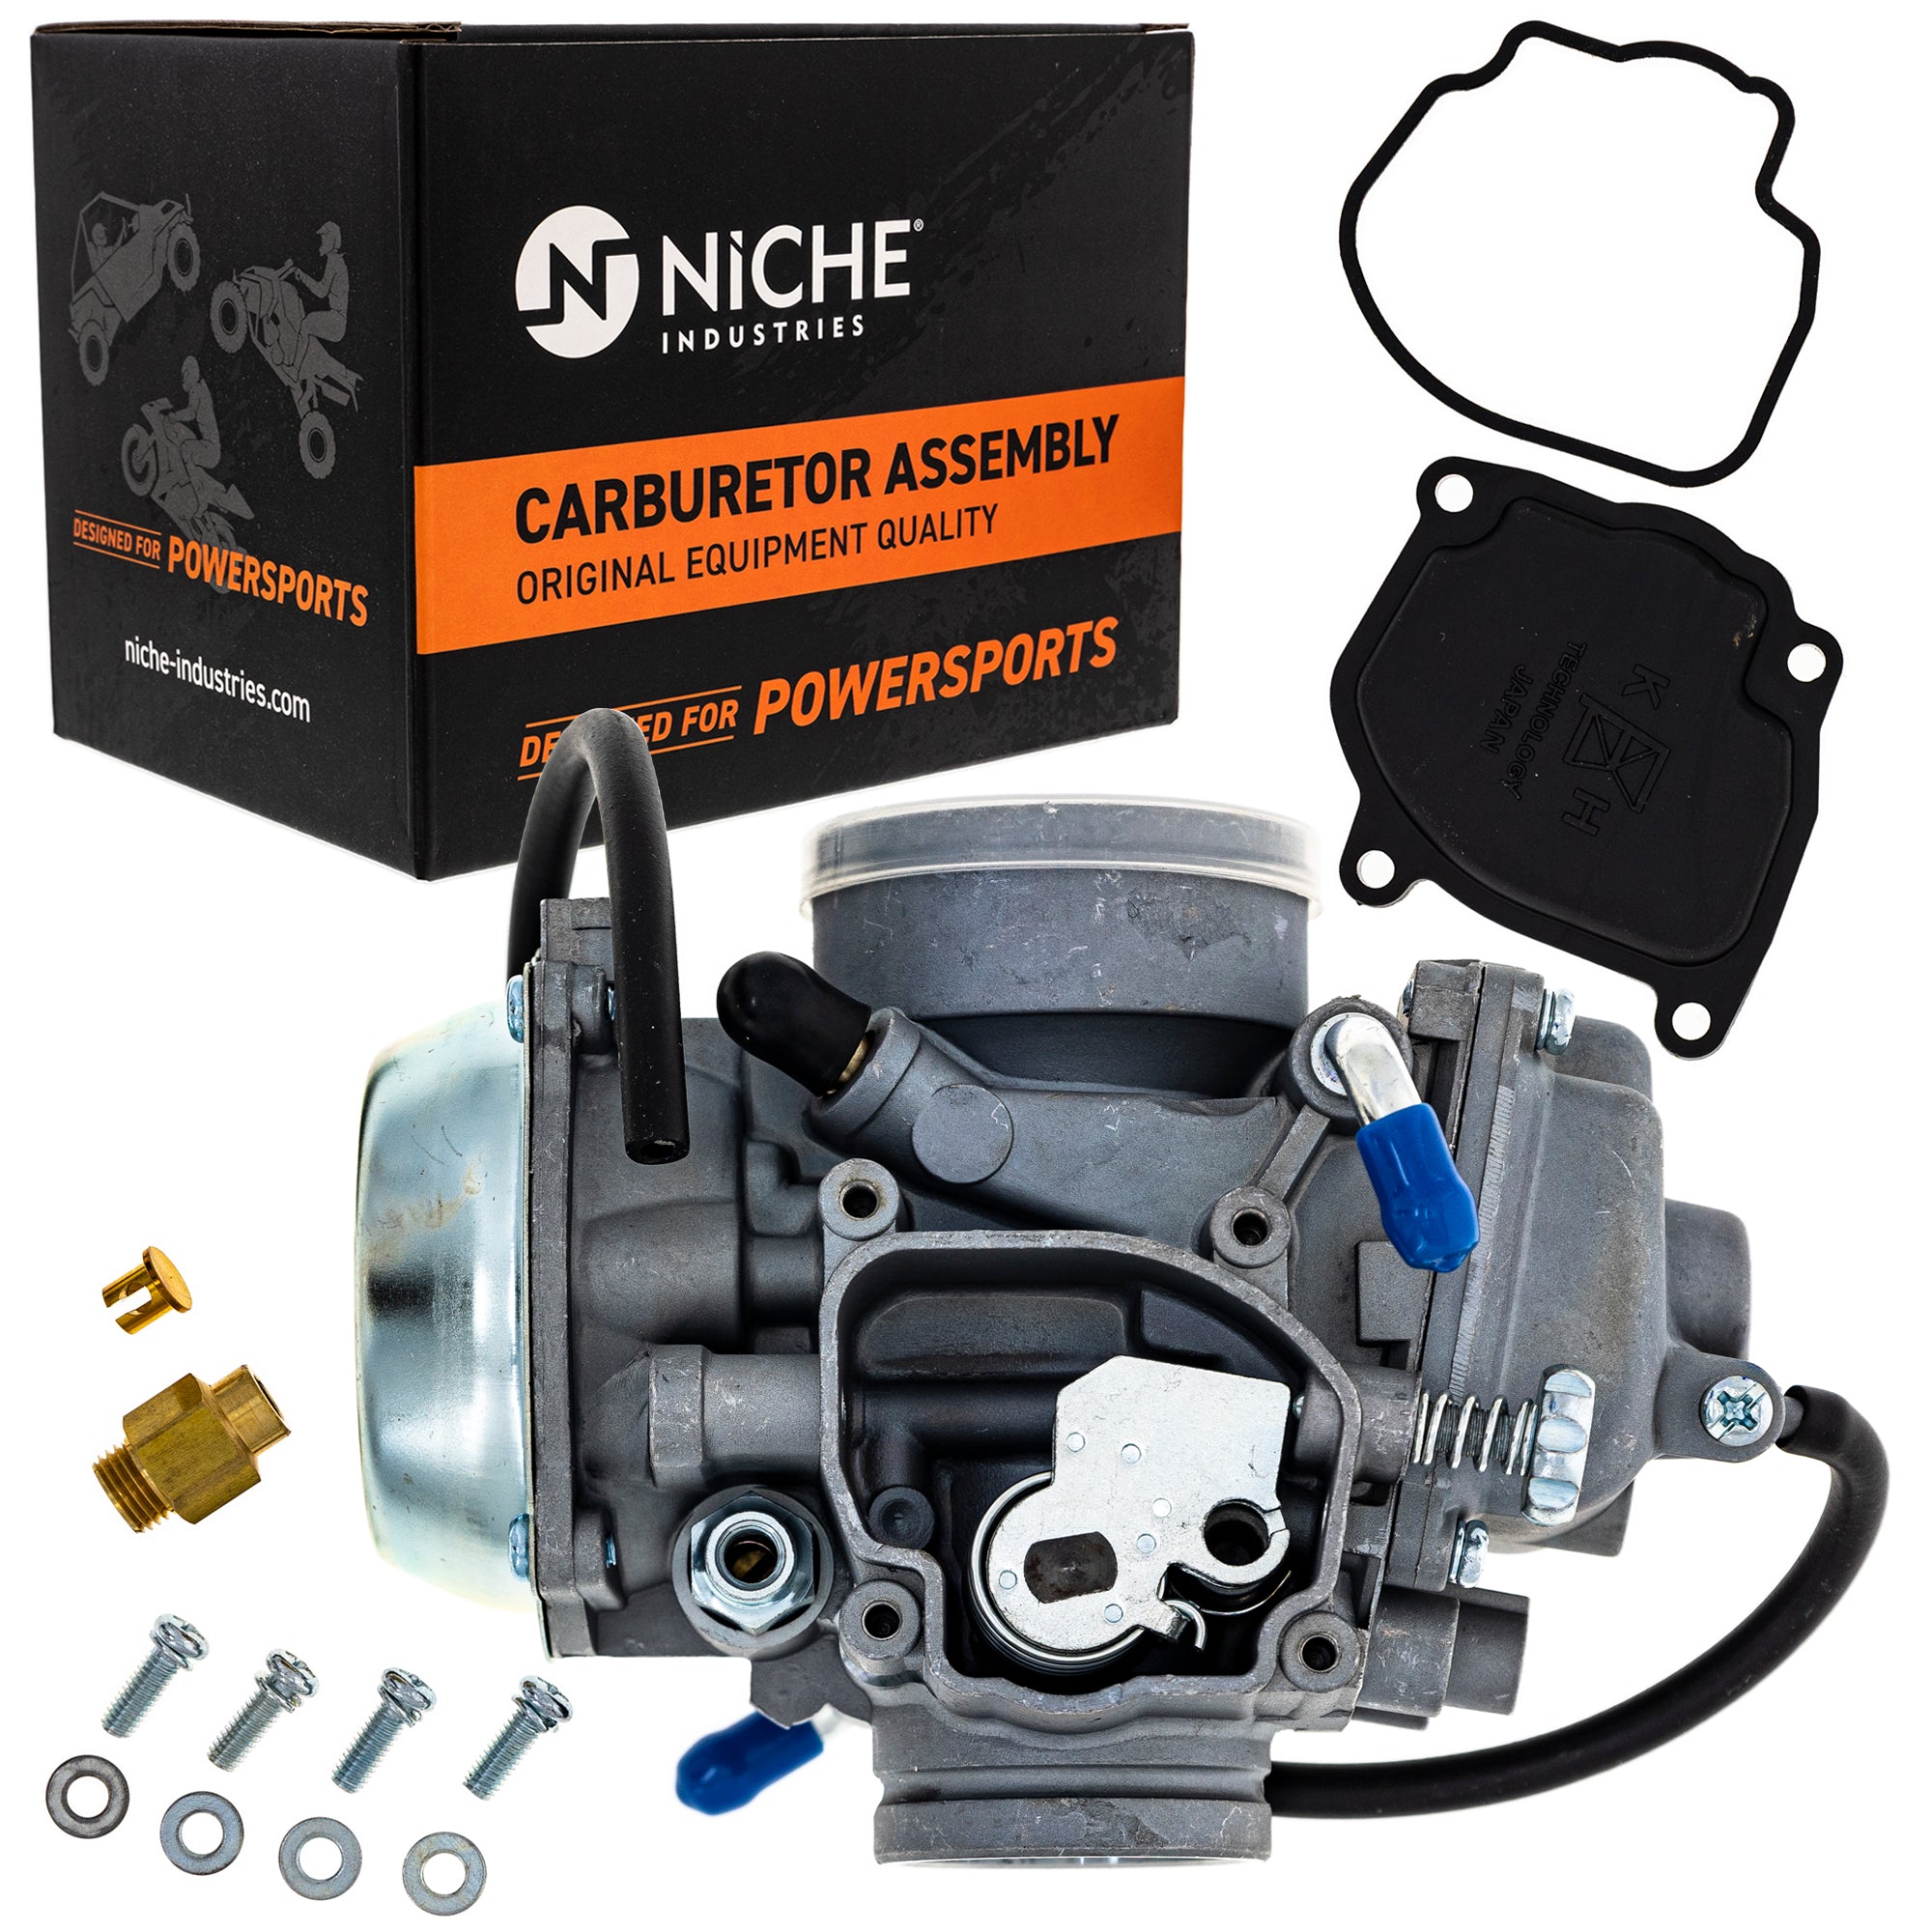 NICHE 519-KCR2202B Carburetor Assembly for zOTHER Polaris Trail